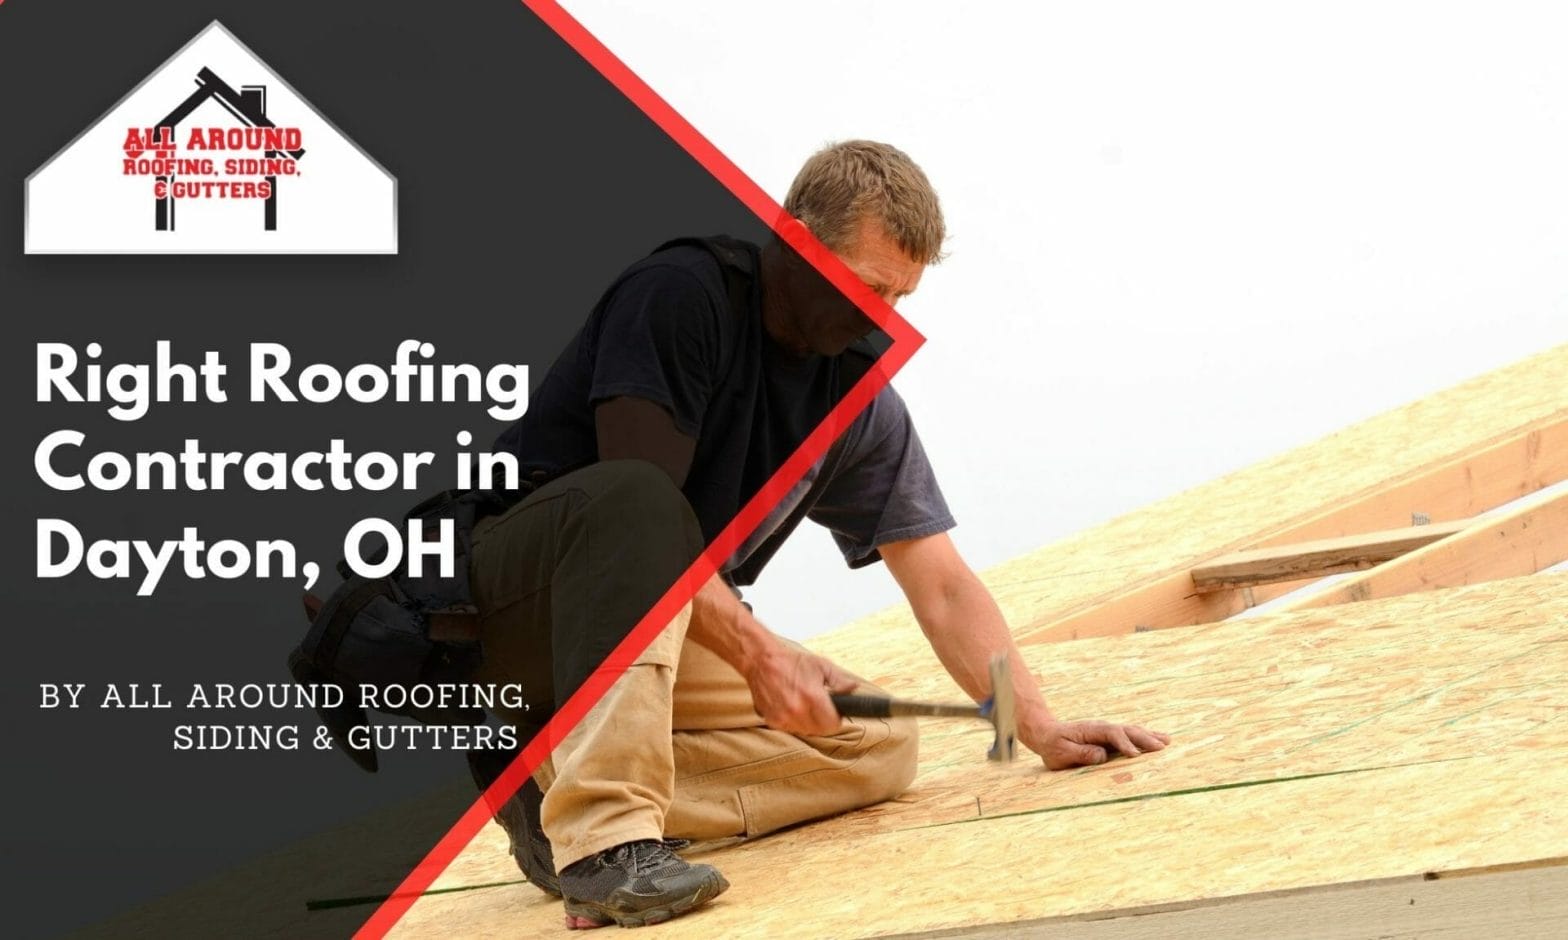 Picking The Right Roofing Contractor in Dayton, OH